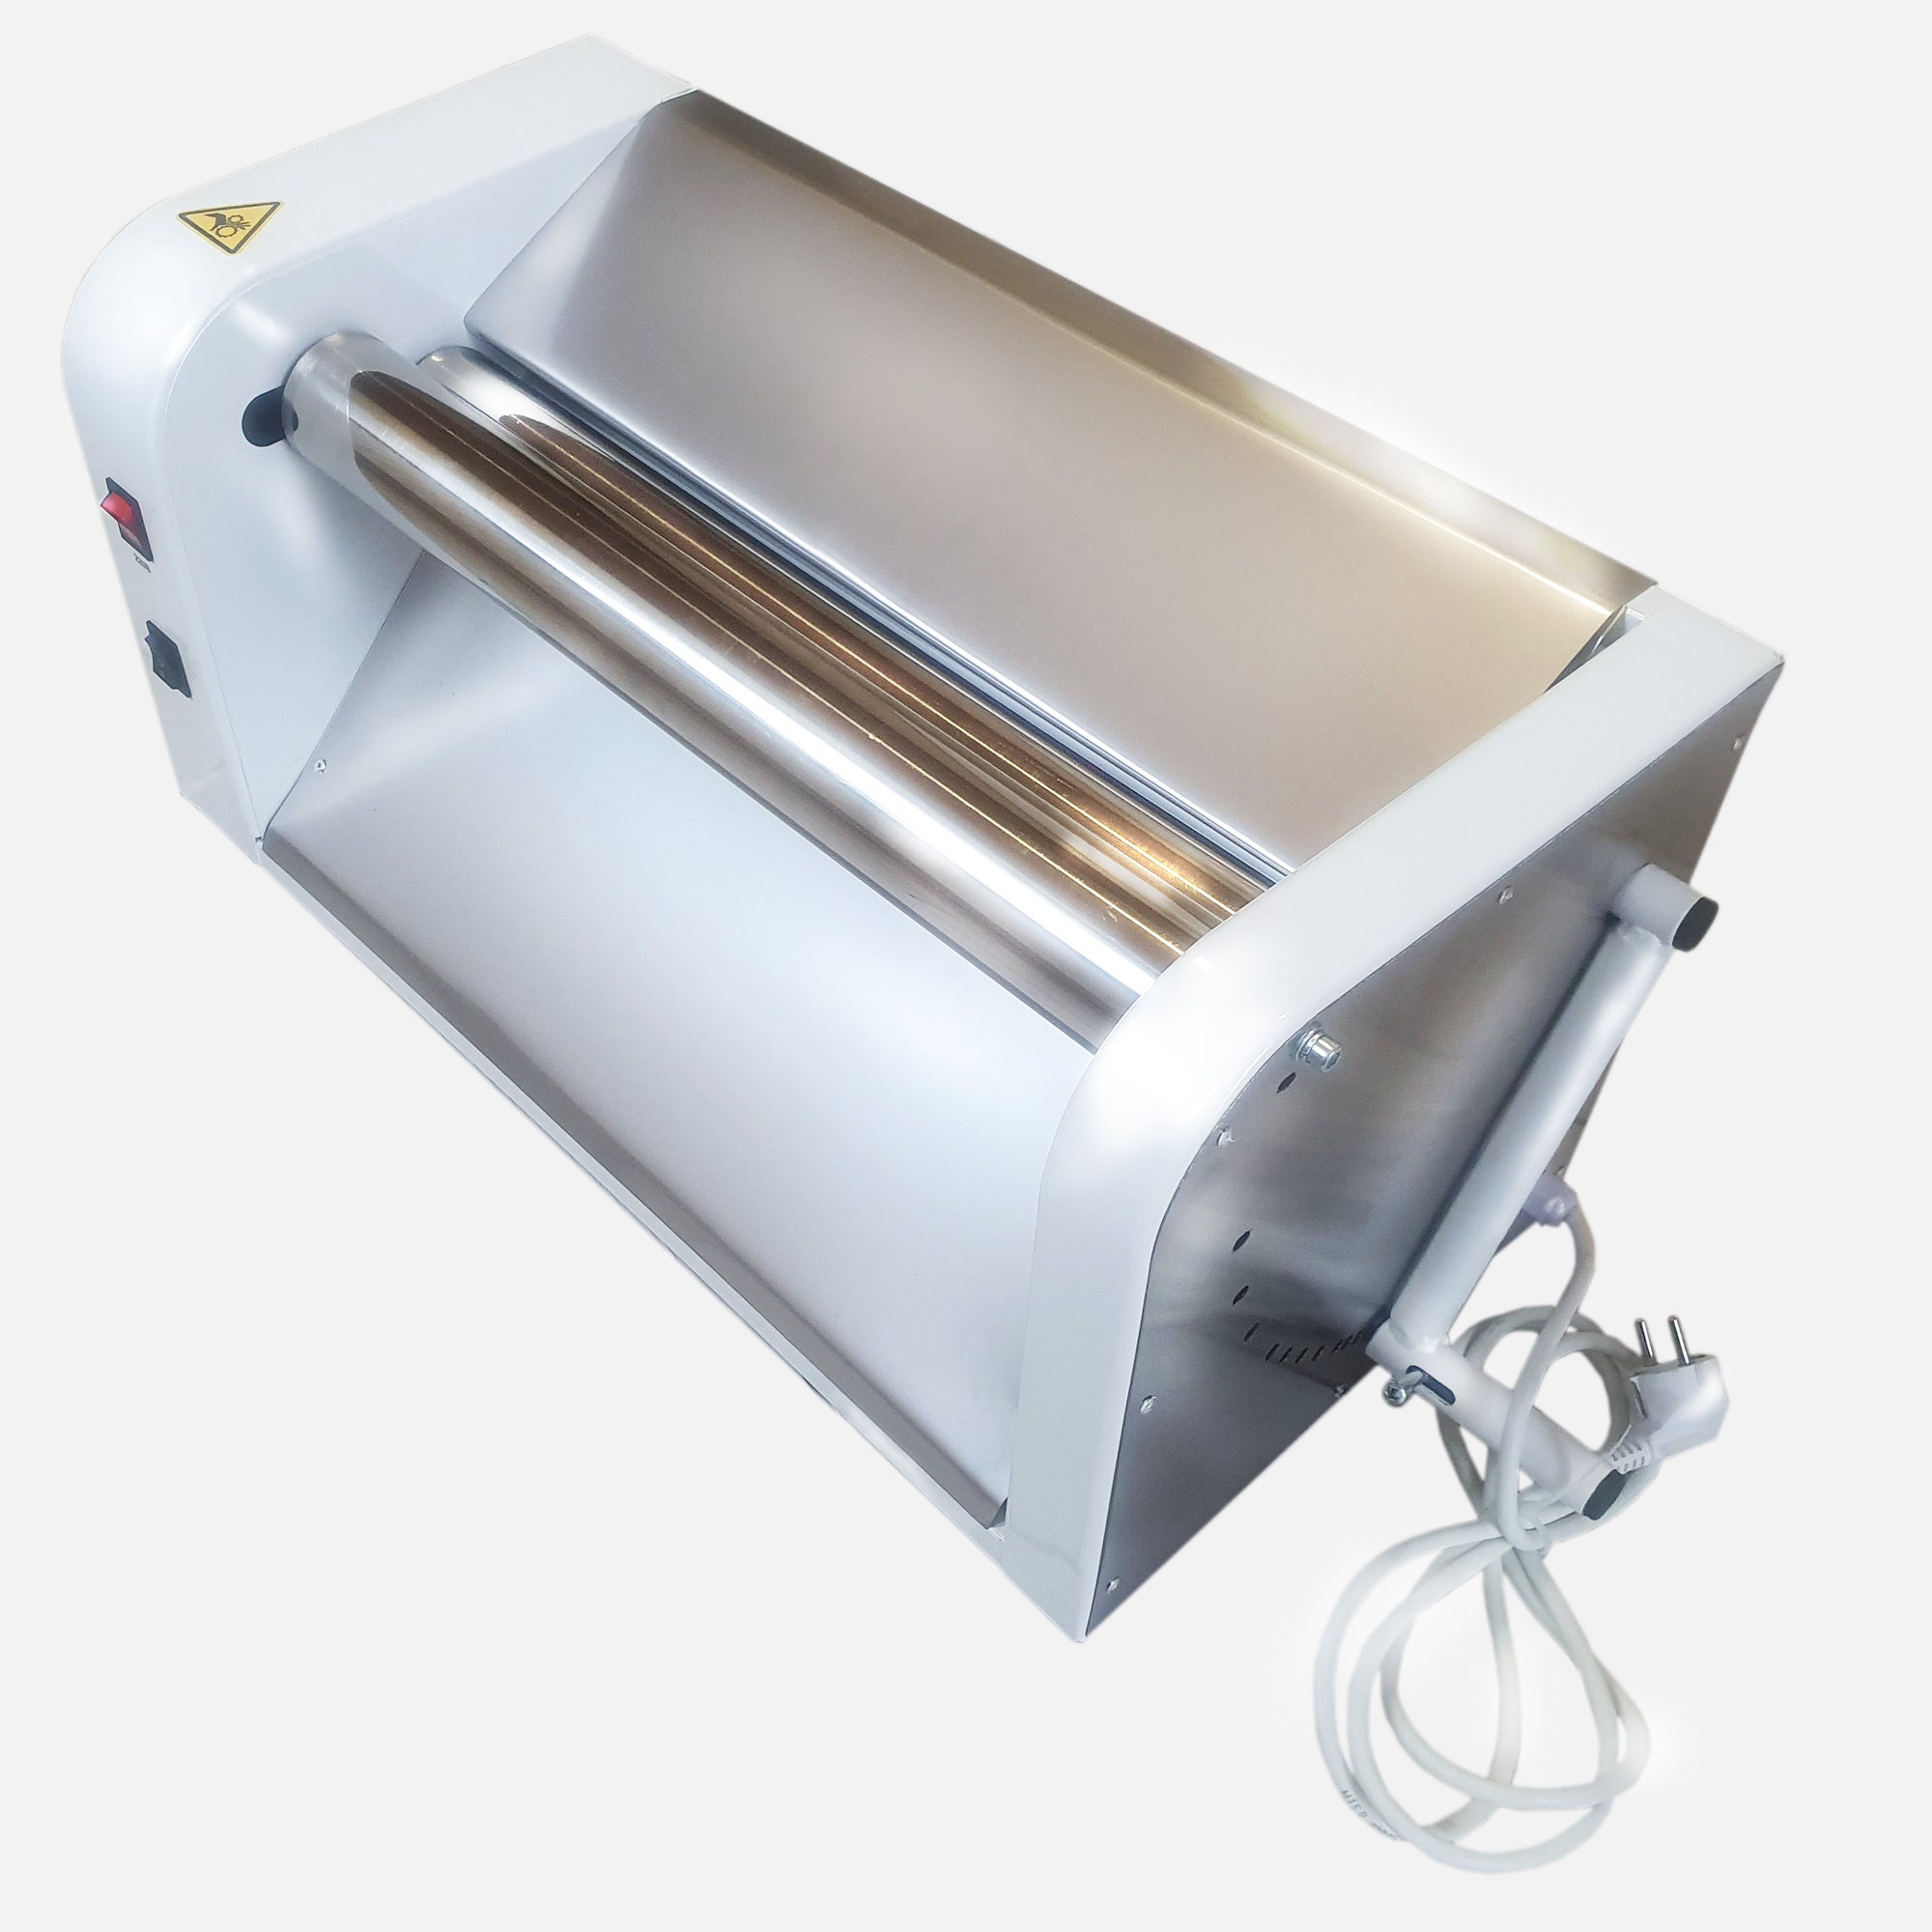 Electric Dough Sheeter for Home Use and Cafe, Dough Sheet, Pasta Roller,  Cakes, Fondant, Bread, Puff Pastry, Kitchen and Dinner, Cookies 